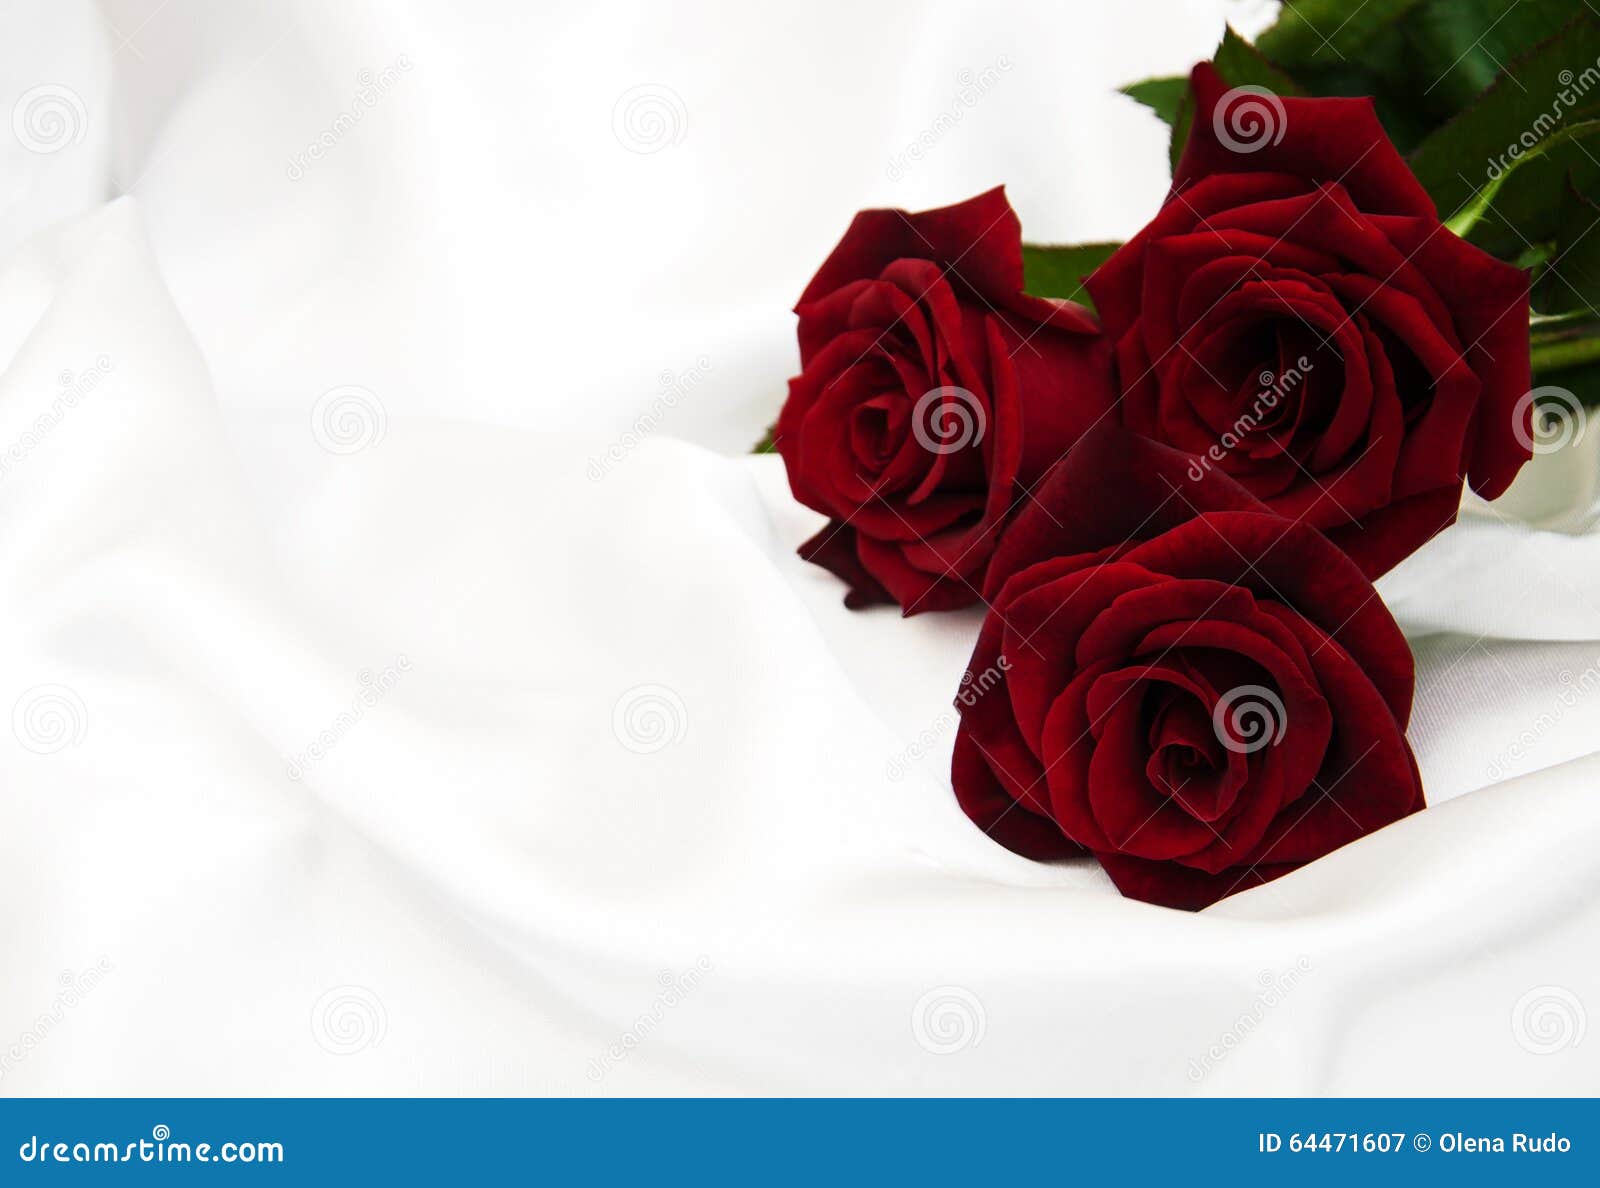 Red roses stock image. Image of beautiful, nature, greeting - 64471607